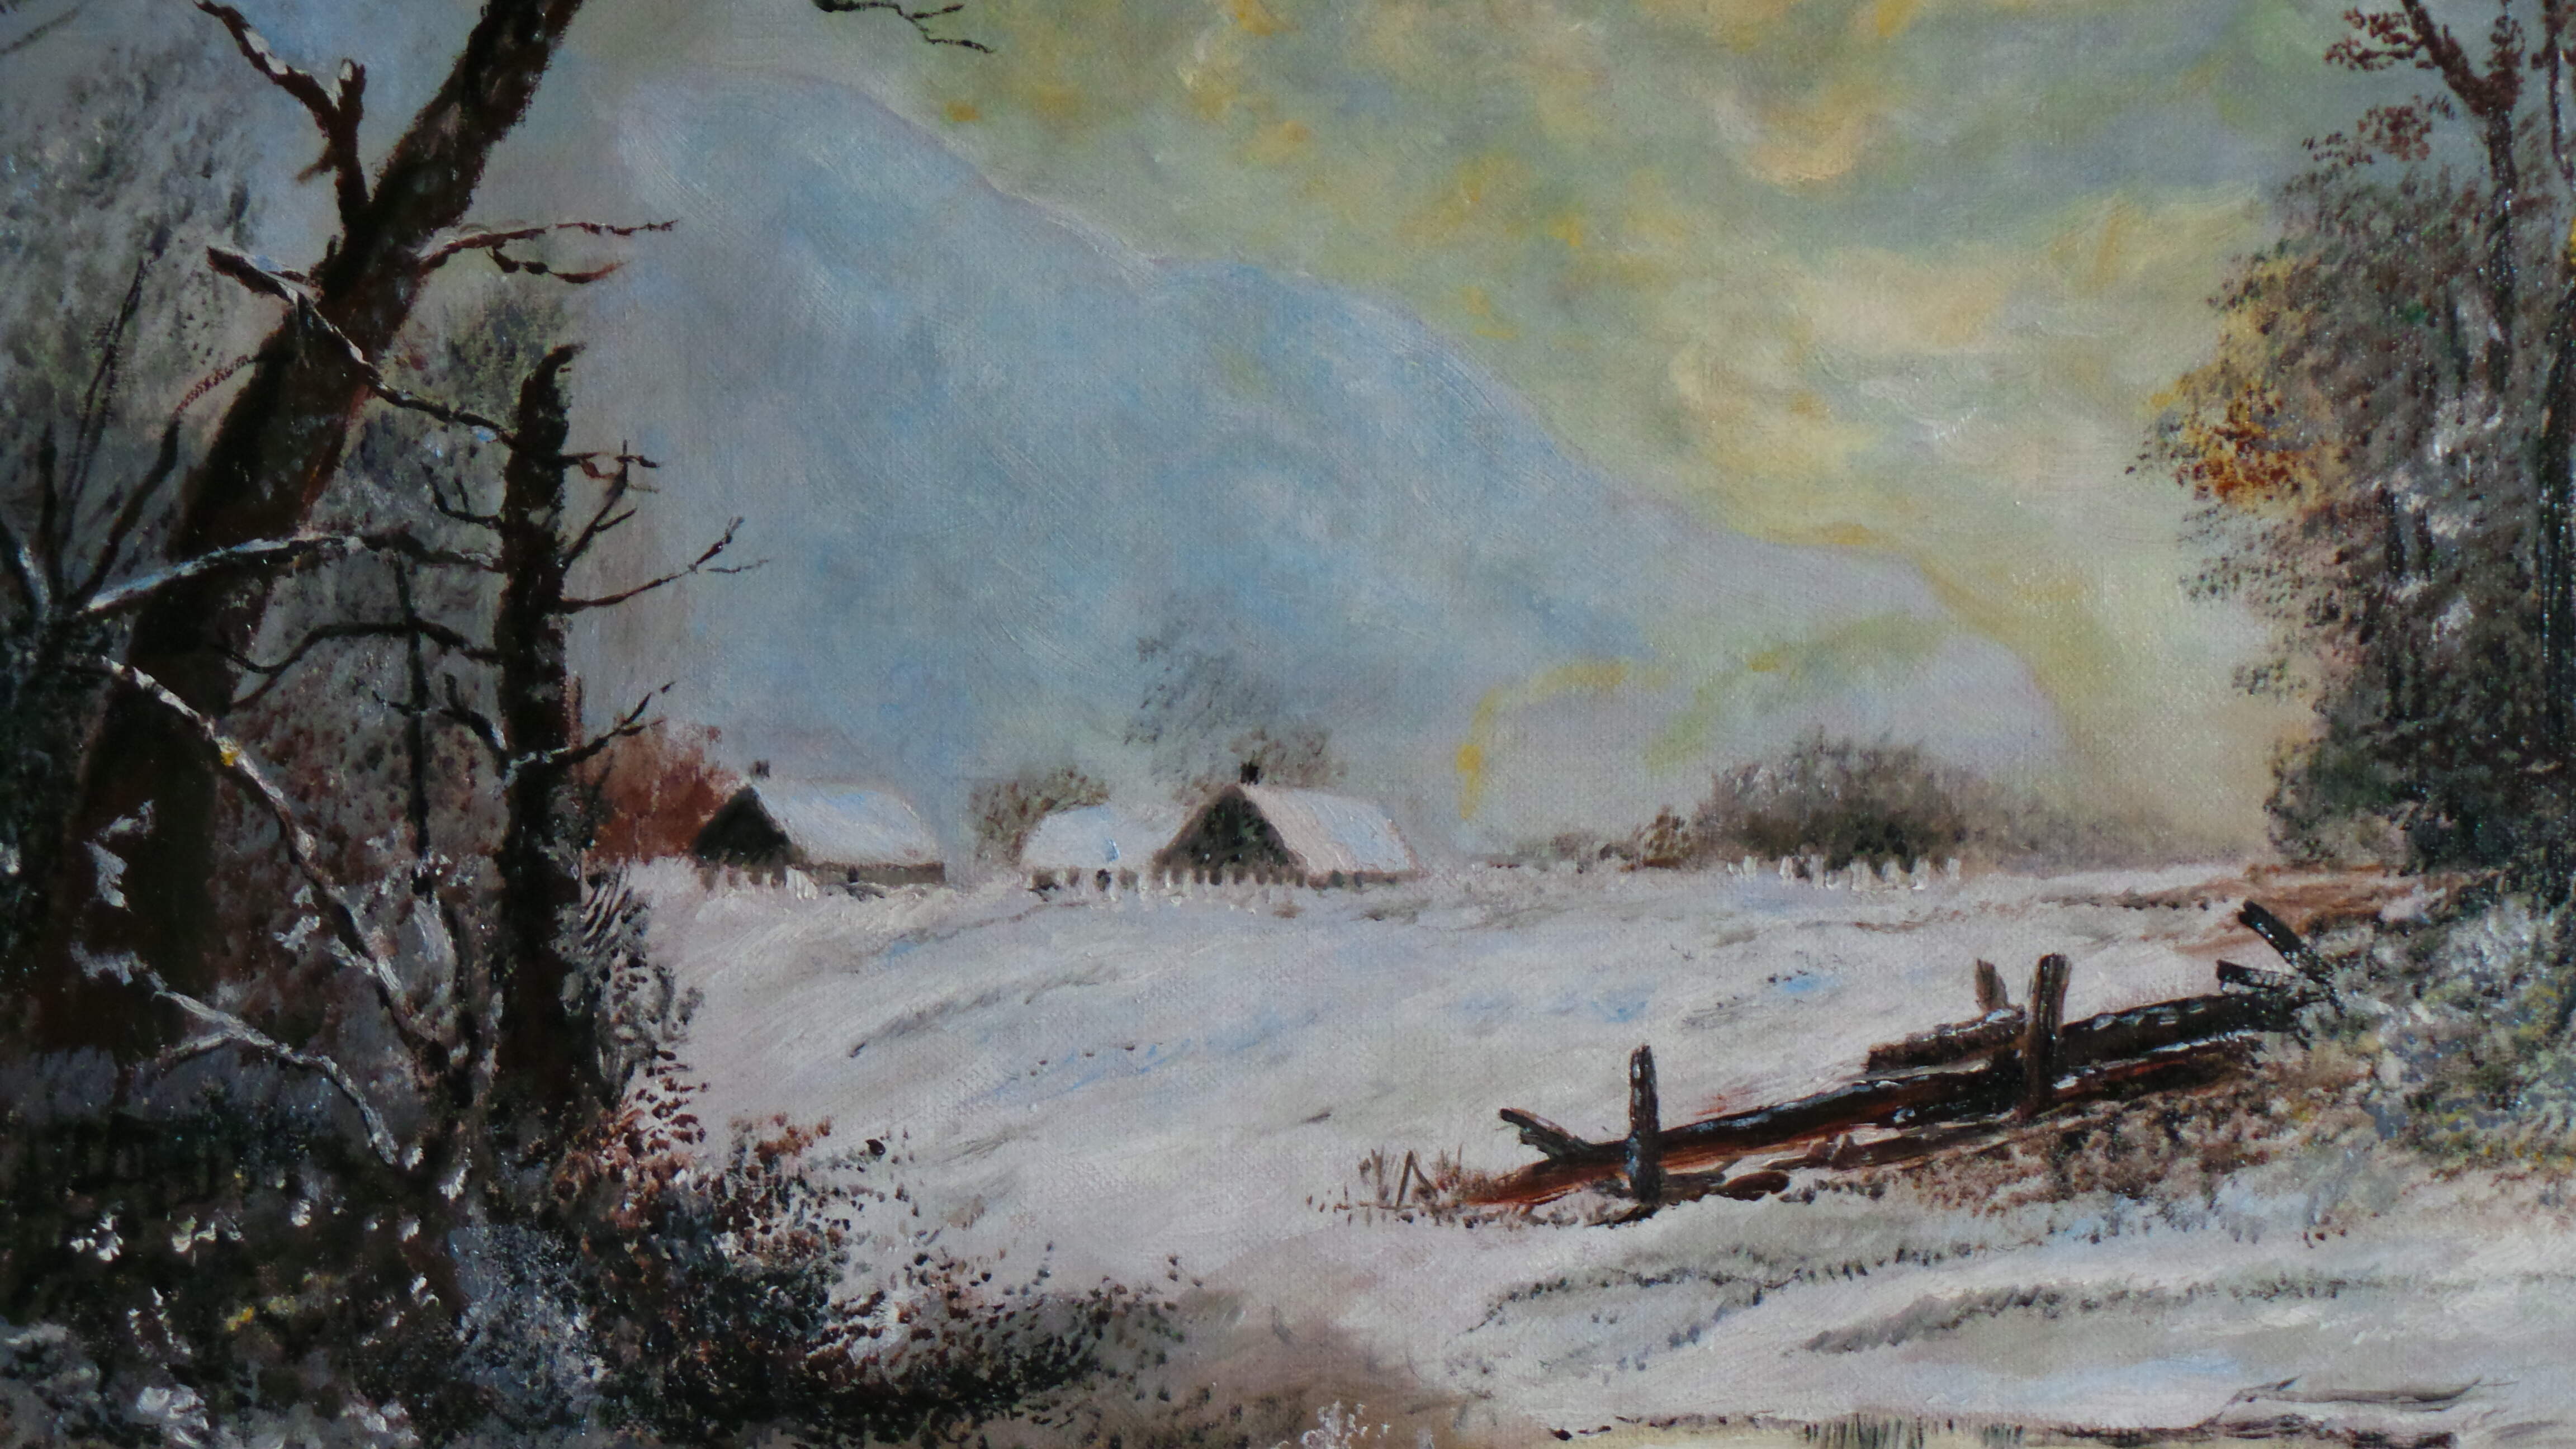 WINTER NOCTURNE OF A SLEEPING VILLAGE. BEAUTIFUL OIL PAINTING ON CANVAS.